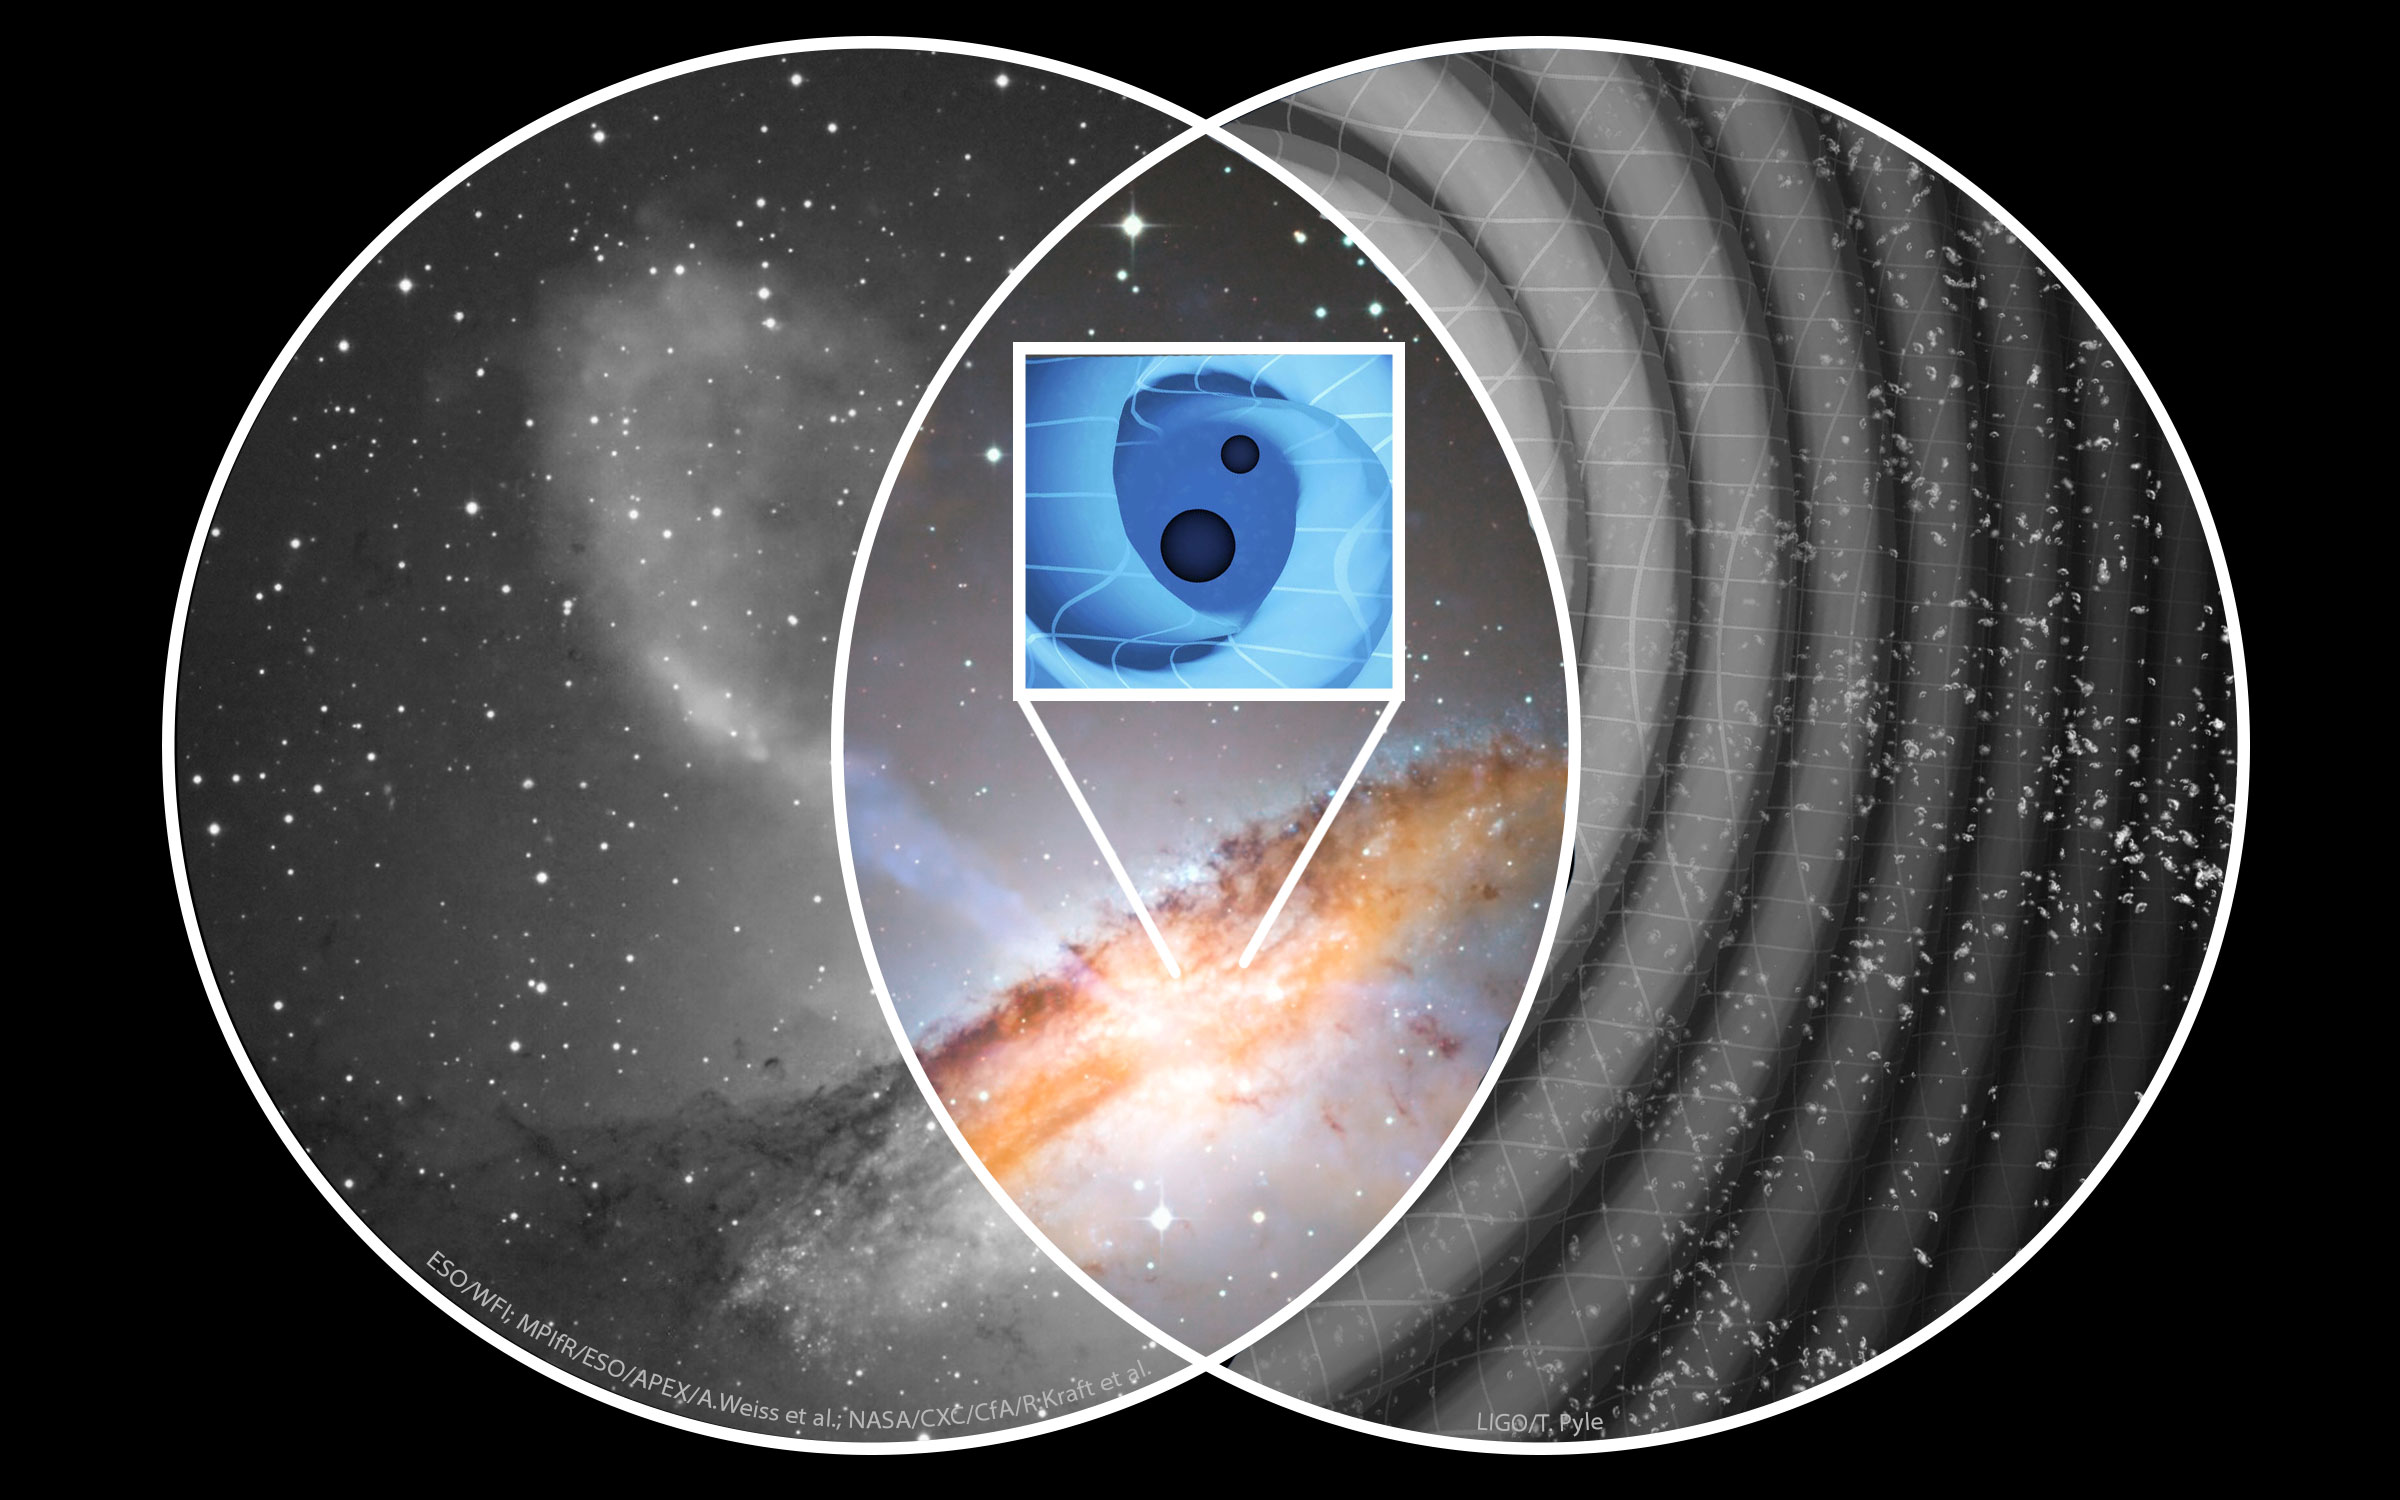 Multimessenger astronomy allows us to combine information to see the universe like never before. Figure credit: Composite; Caitlin Witt. Components; ESO/WFI (Optical); MPIfR/ESO/APEX/A.Weiss et al. (Submillimetre); NASA/CXC/CfA/R.Kraft et al. (X-ray). LIGO/T. Pyle (GW).